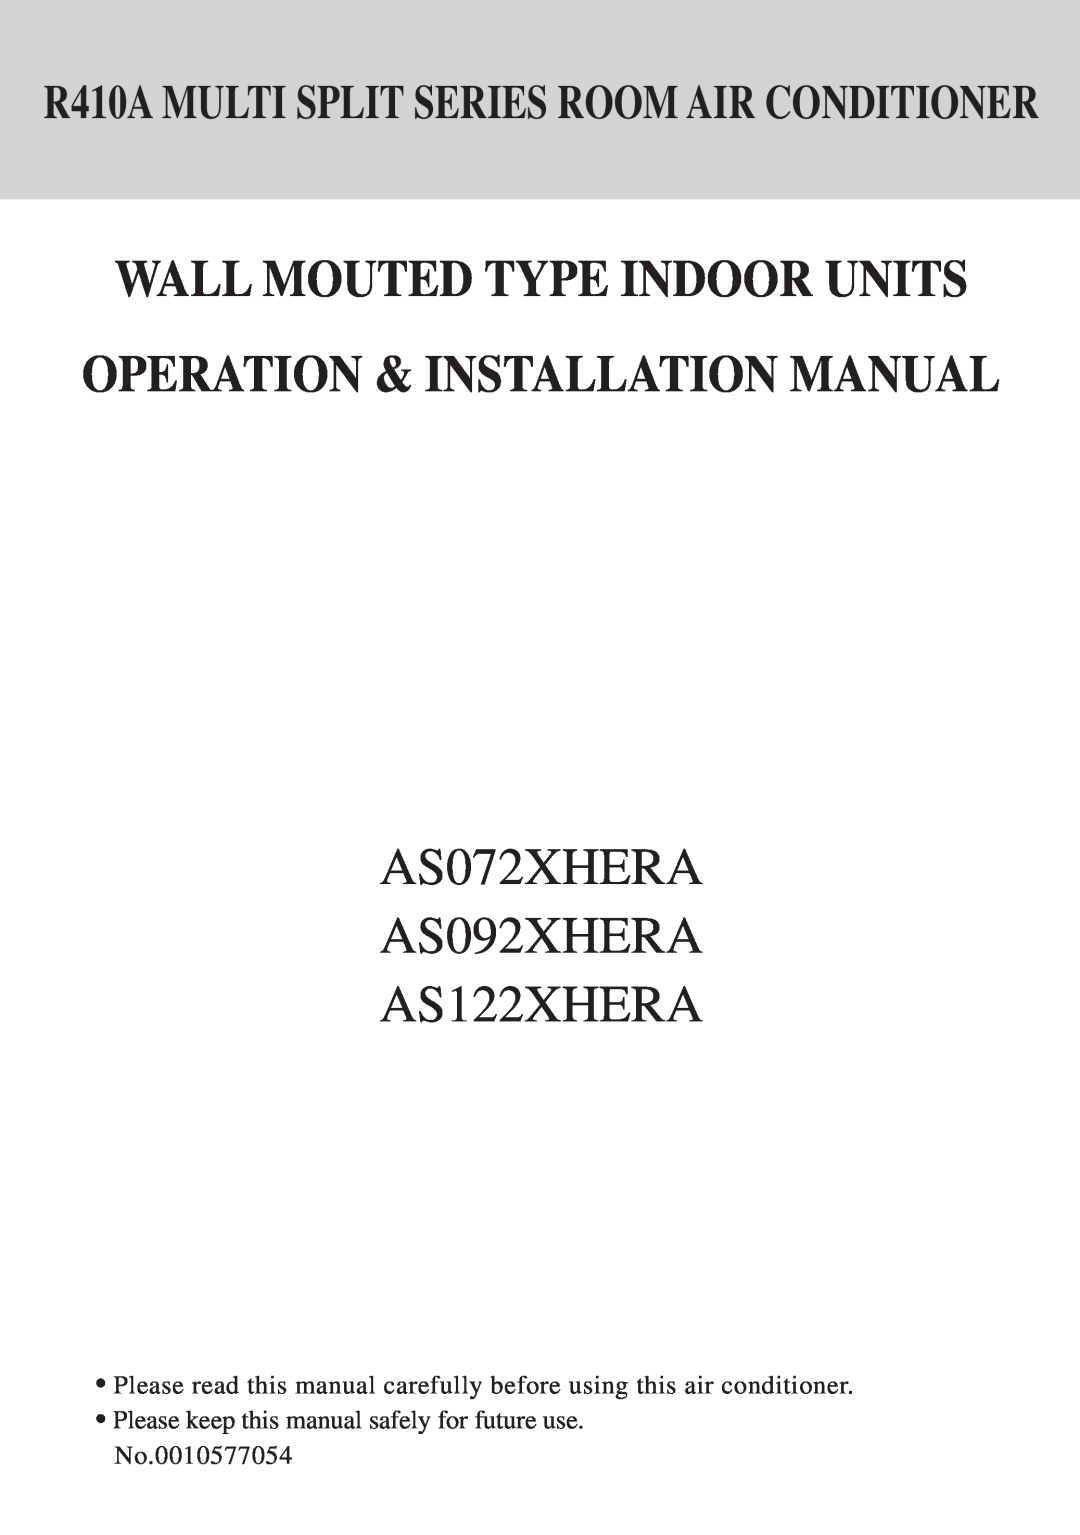 Haier AS072XHERA installation manual Wall Mouted Type Indoor Units, R410A MULTI SPLIT SERIES ROOM AIR CONDITIONER 